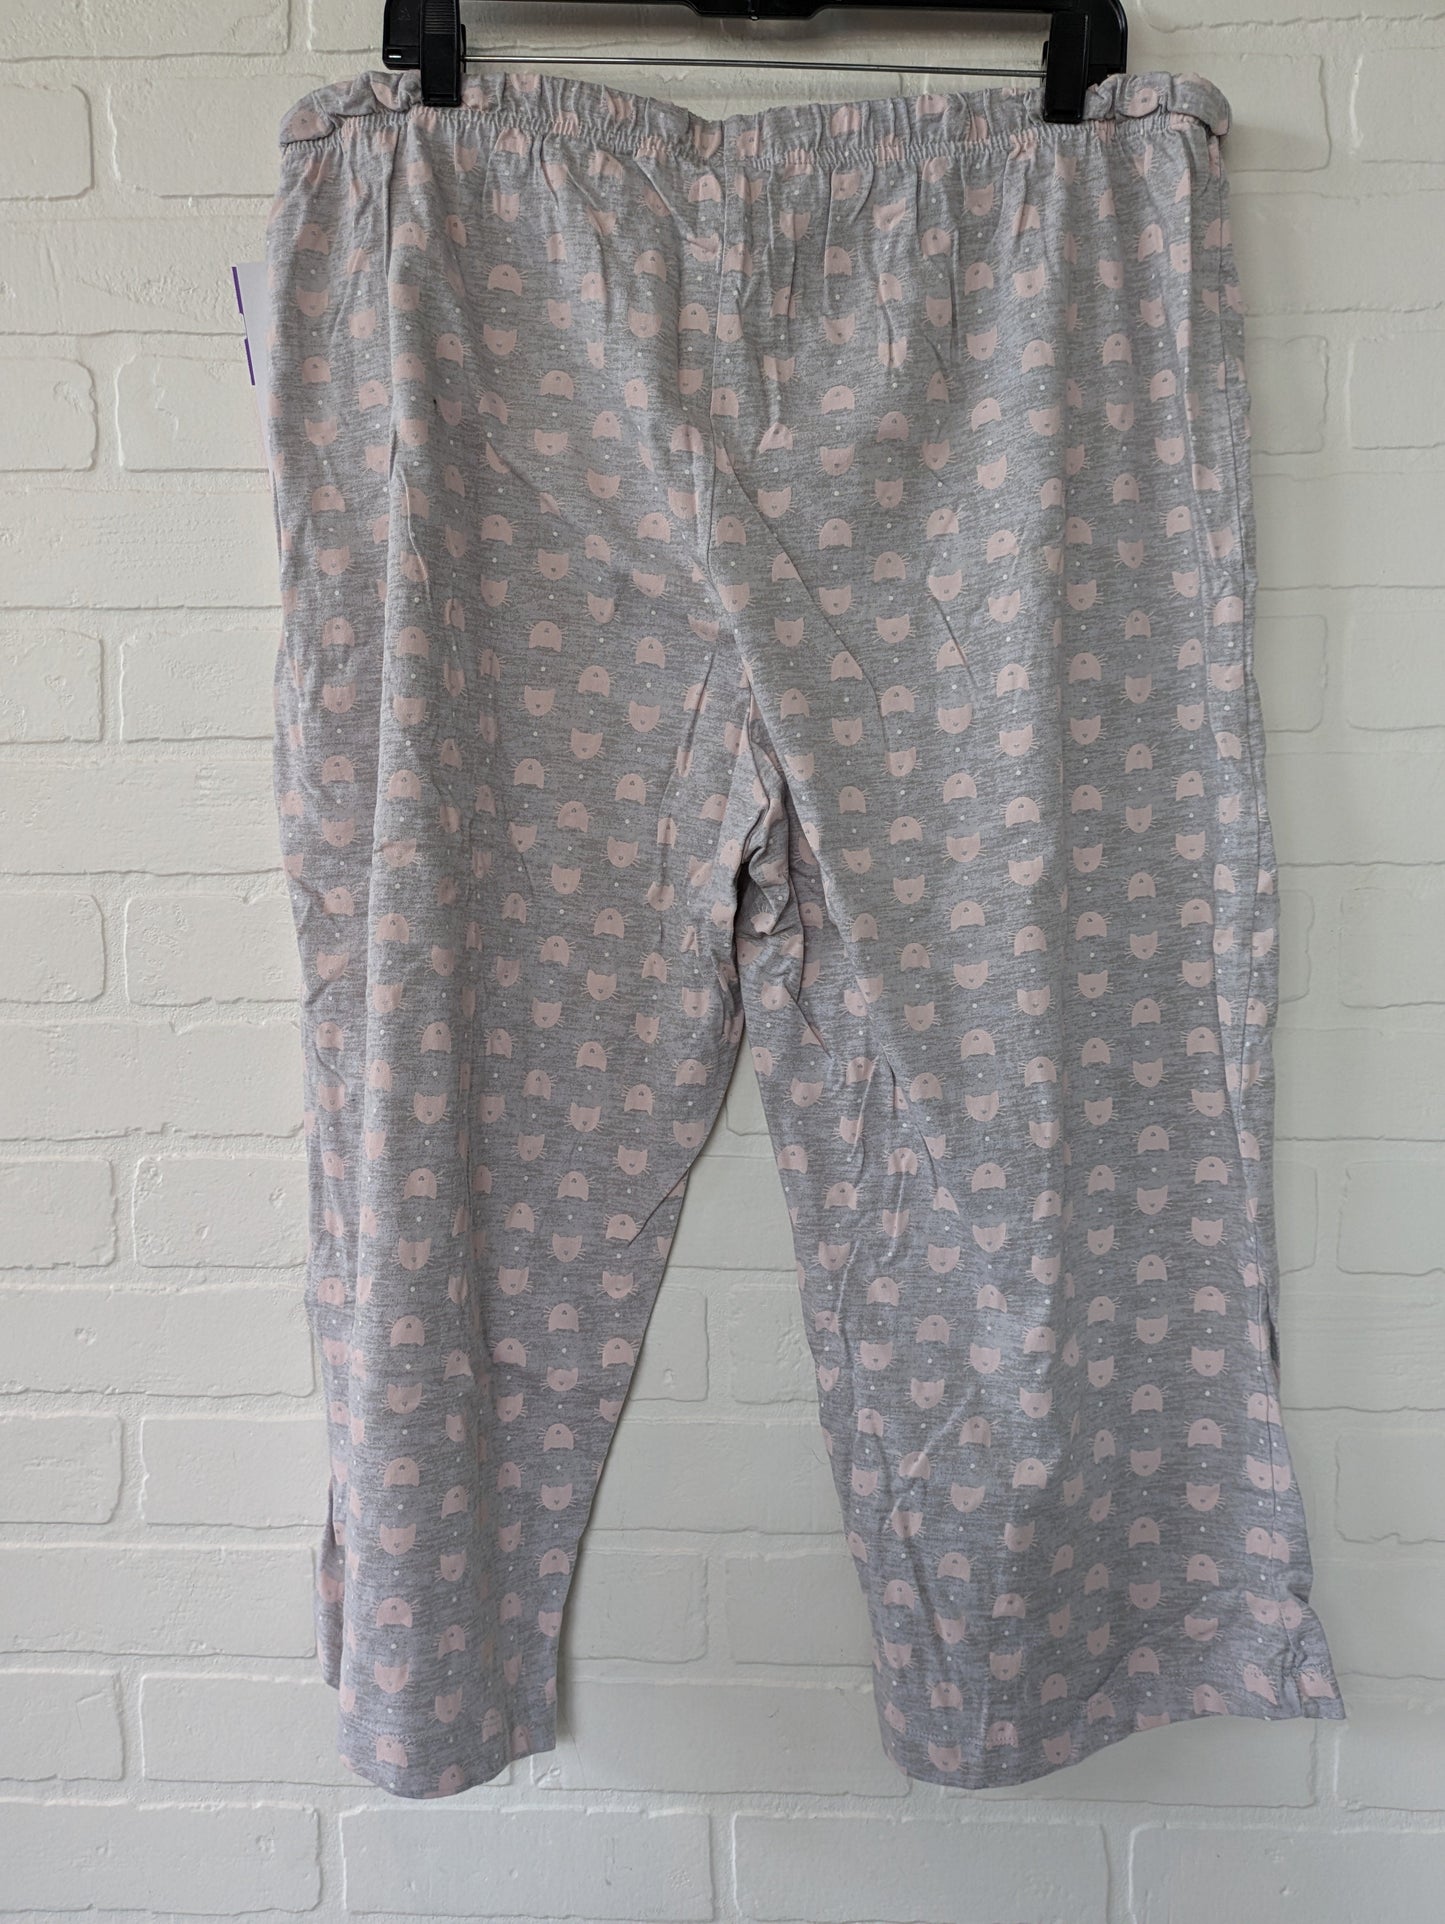 Pajamas 2pc By Clothes Mentor  Size: 2x